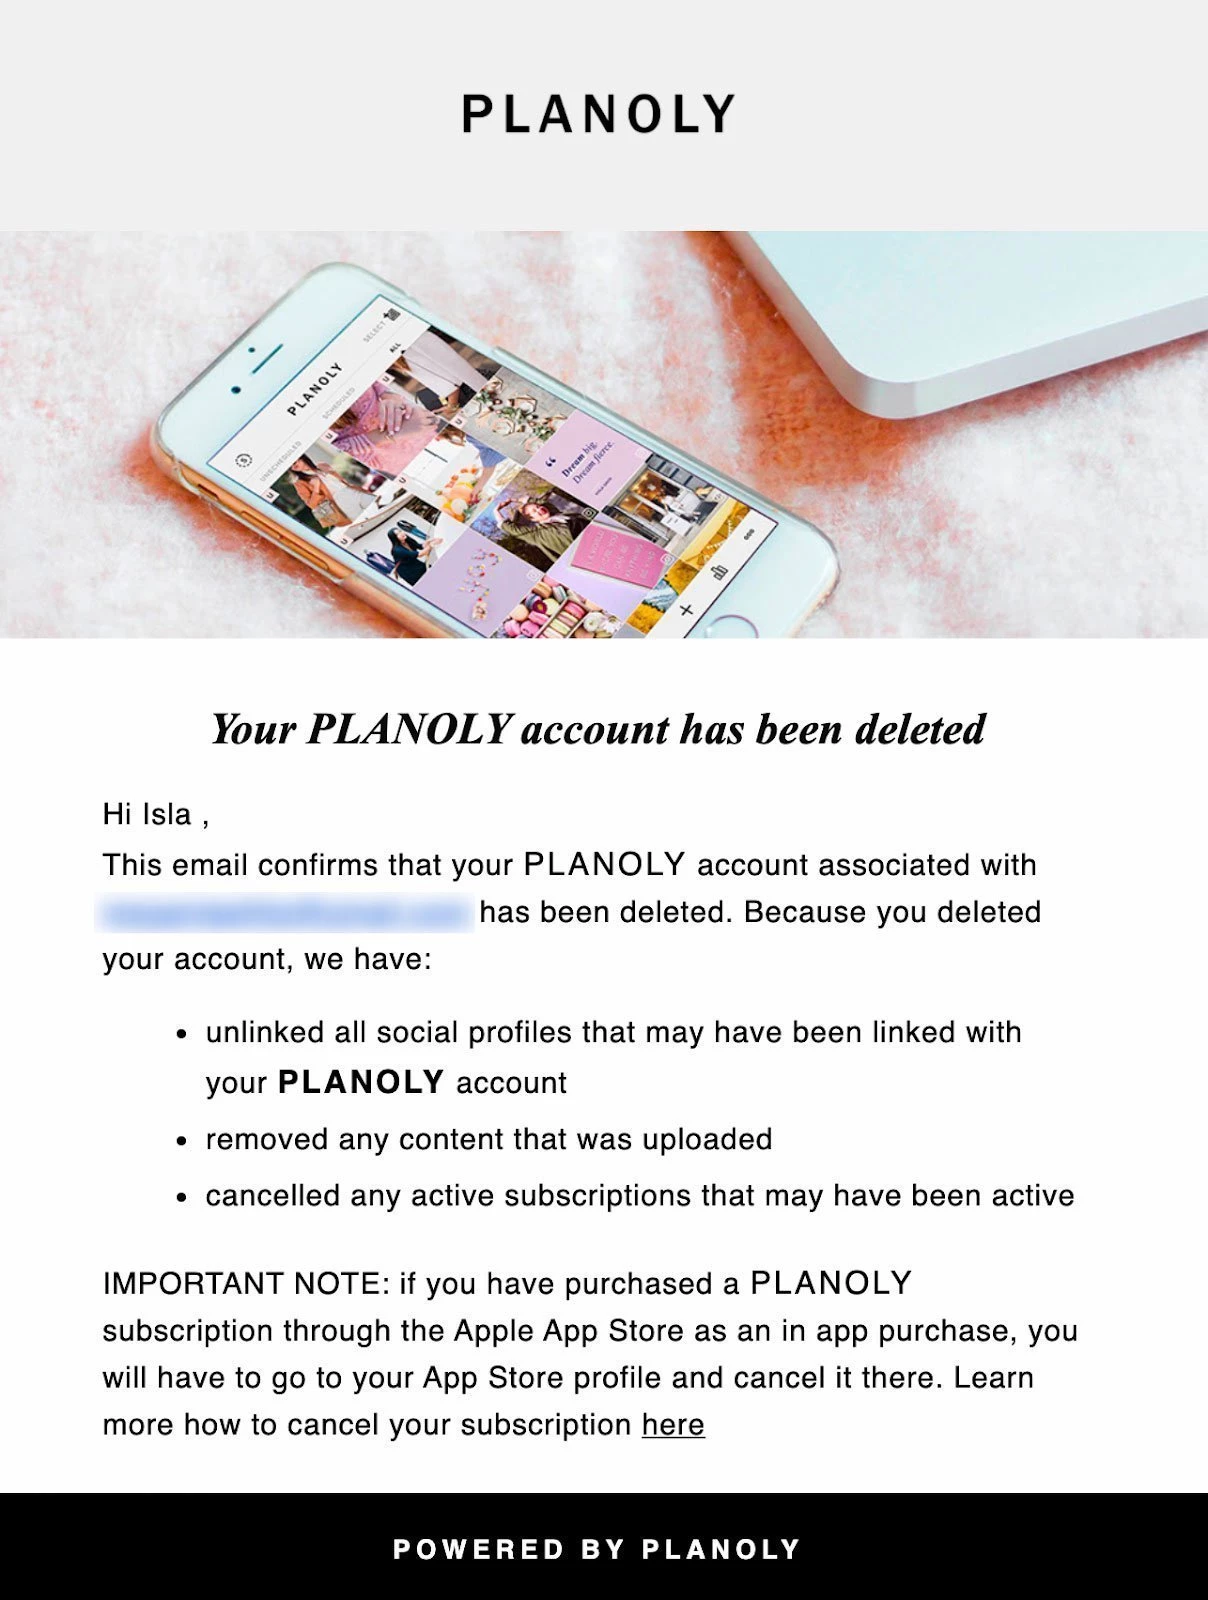 An account deactivation transactional email example from Planoly.